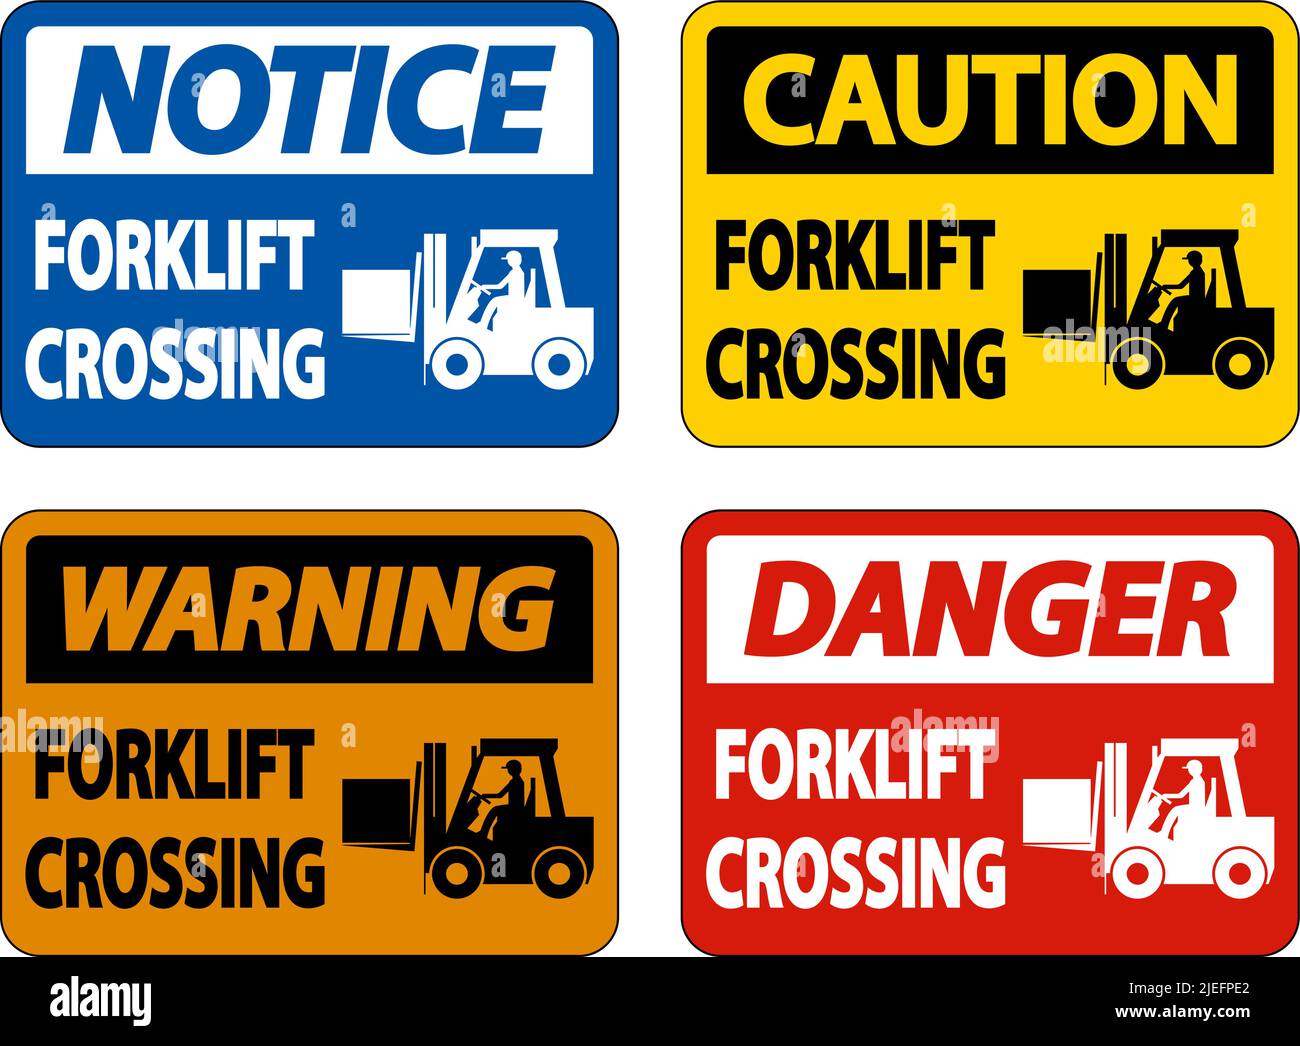 Forklift Crossing Sign On White Background Stock Vector Image & Art - Alamy